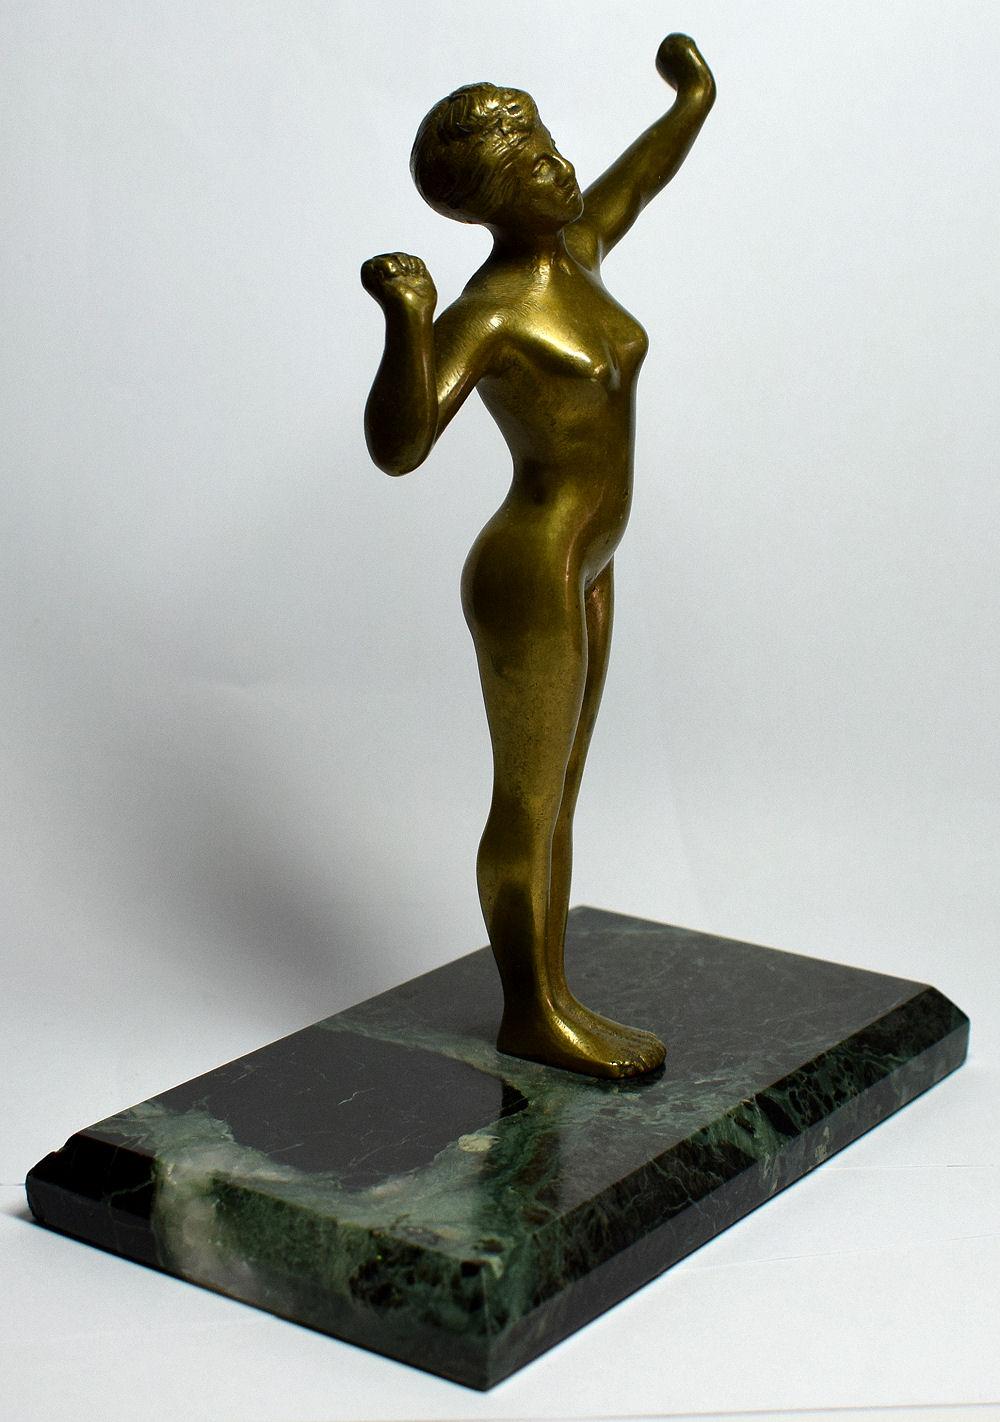 For your consideration is this wonderful Art Deco female figure made from brass and lacquered on top. She rests on an marble base and stands 18 cm tall so a good height for display. Beautifully detailed and good condition, all fingers and toes are